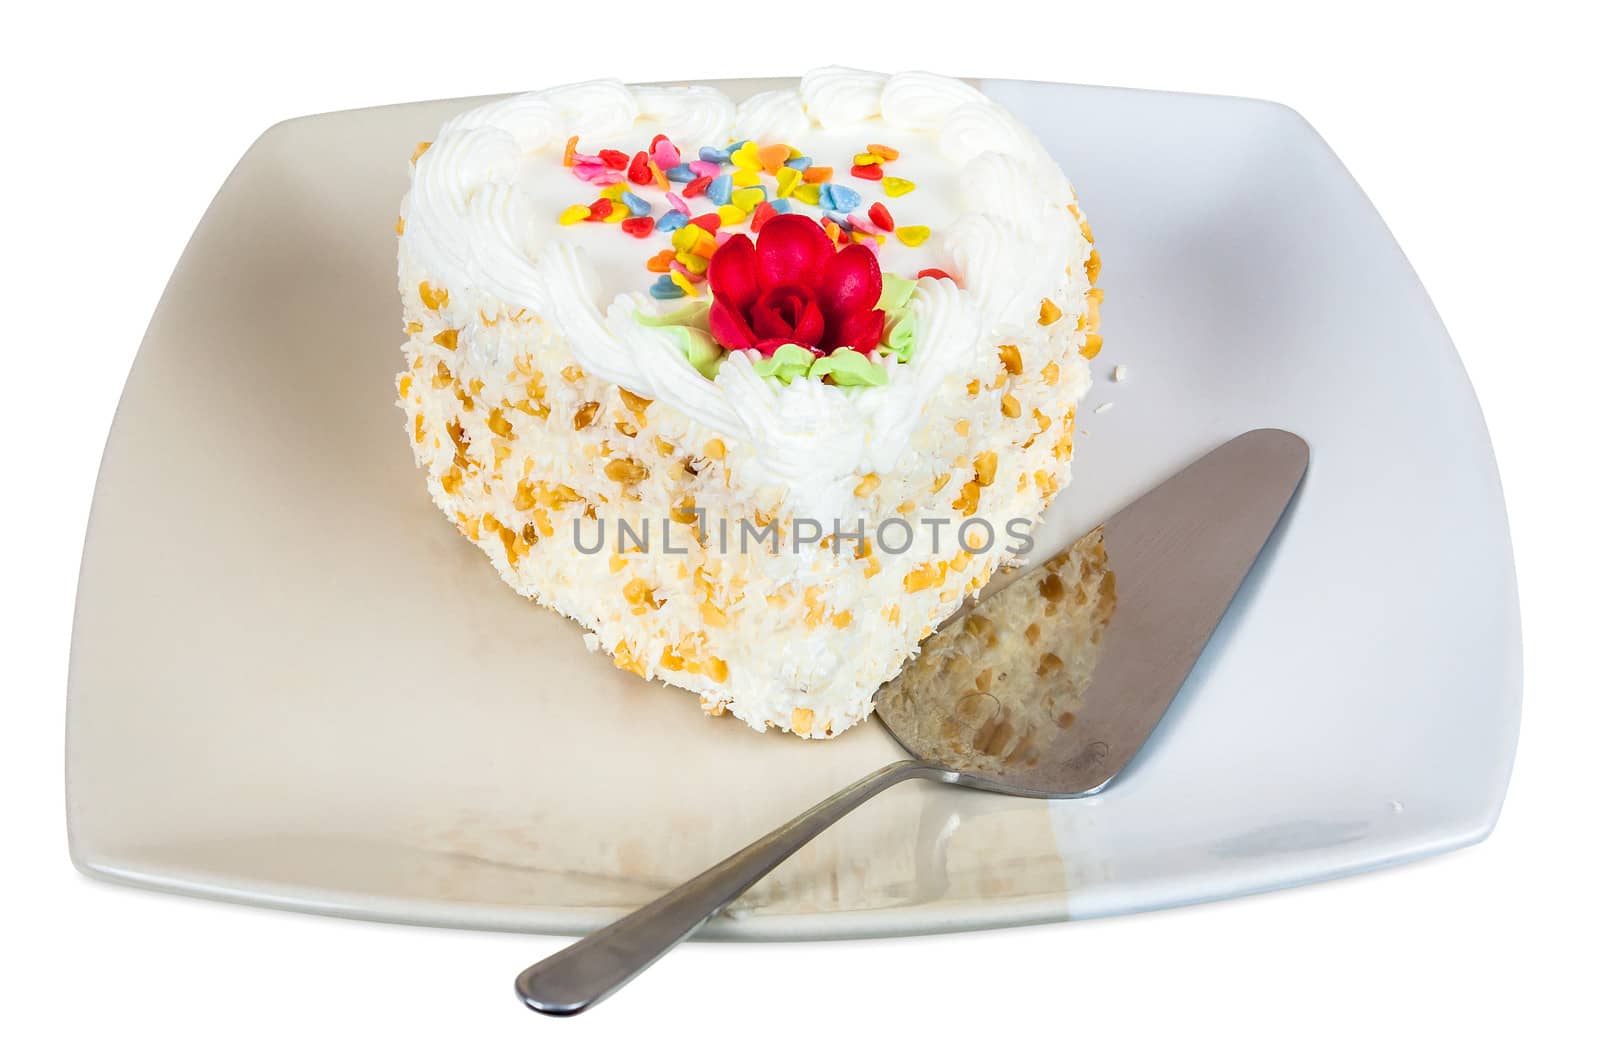 Cake in the shape of heart on plate by mkos83